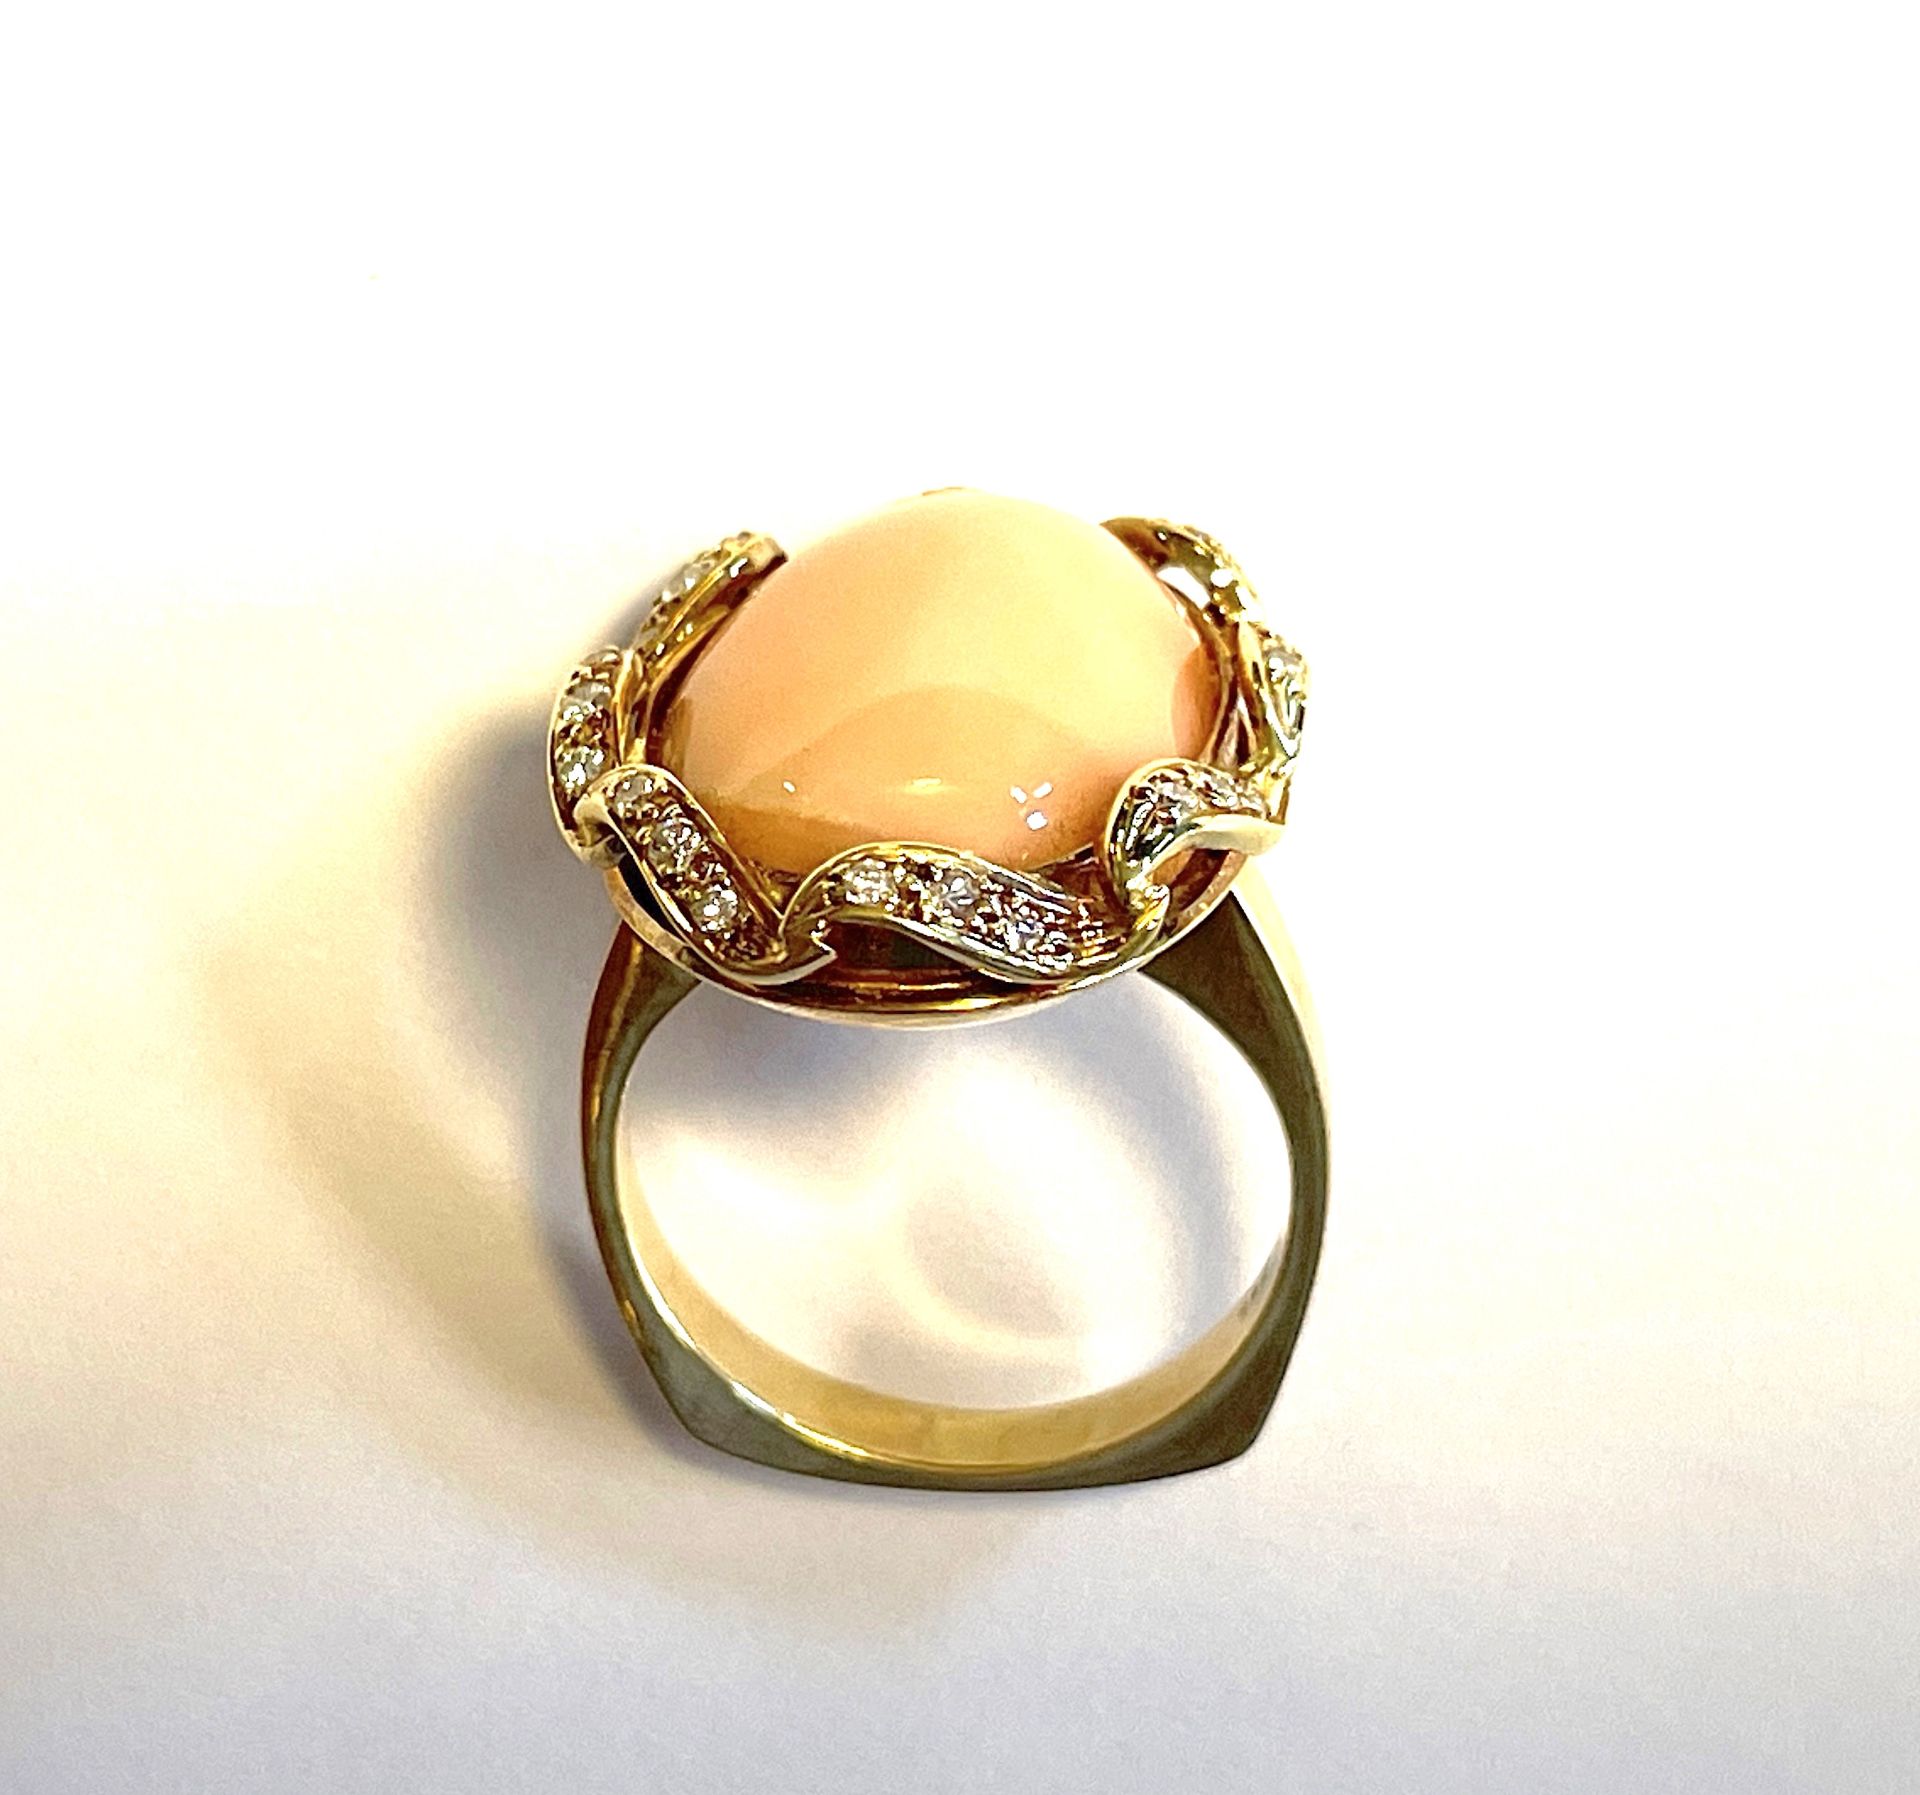 Coral ring with diamonds - Image 10 of 11